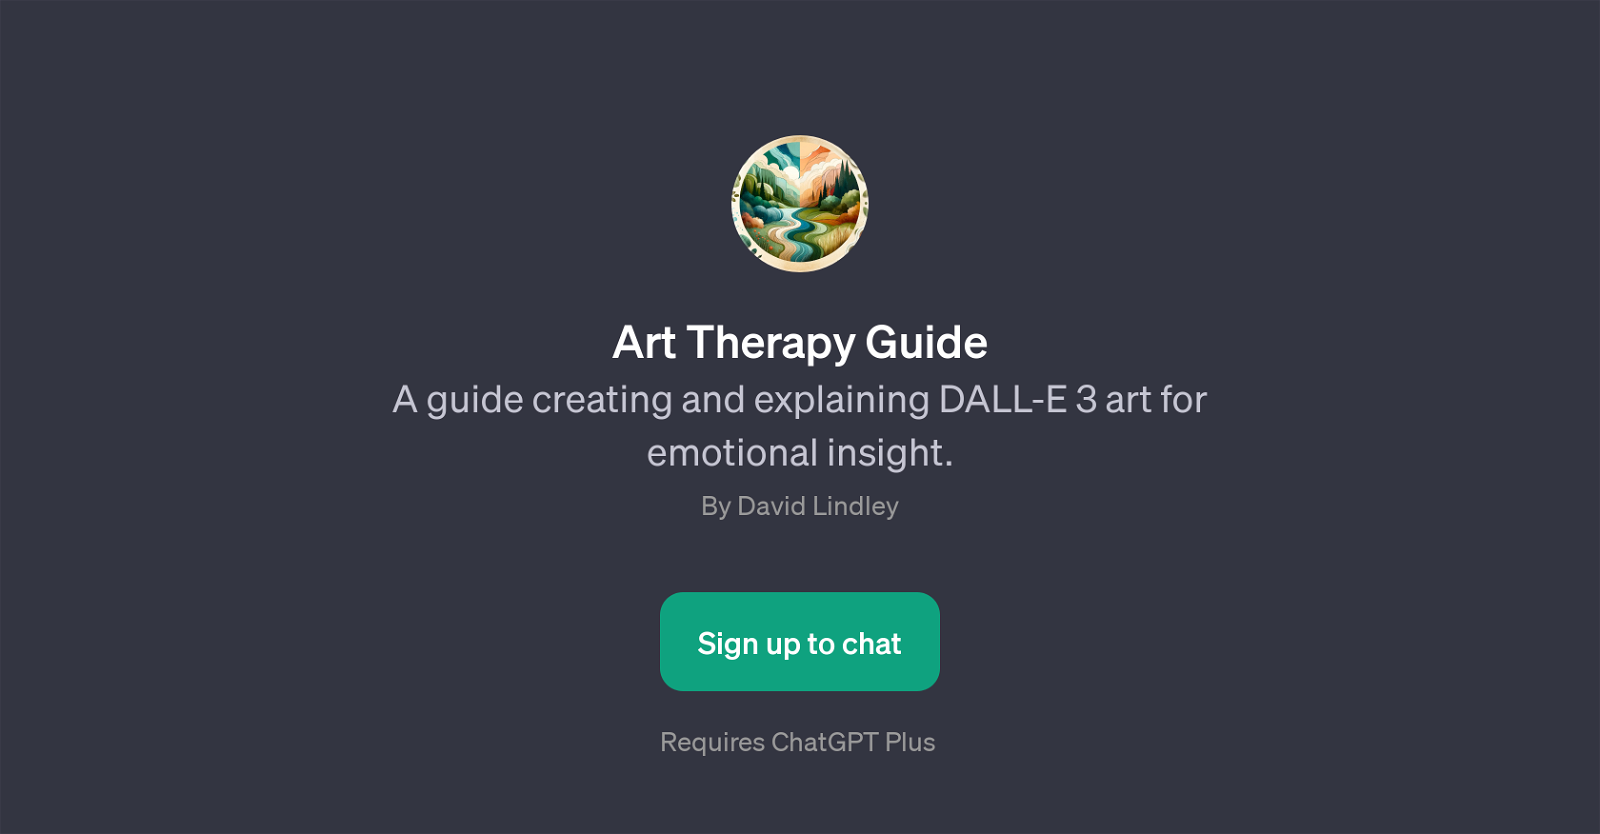 Art Therapy Guide website